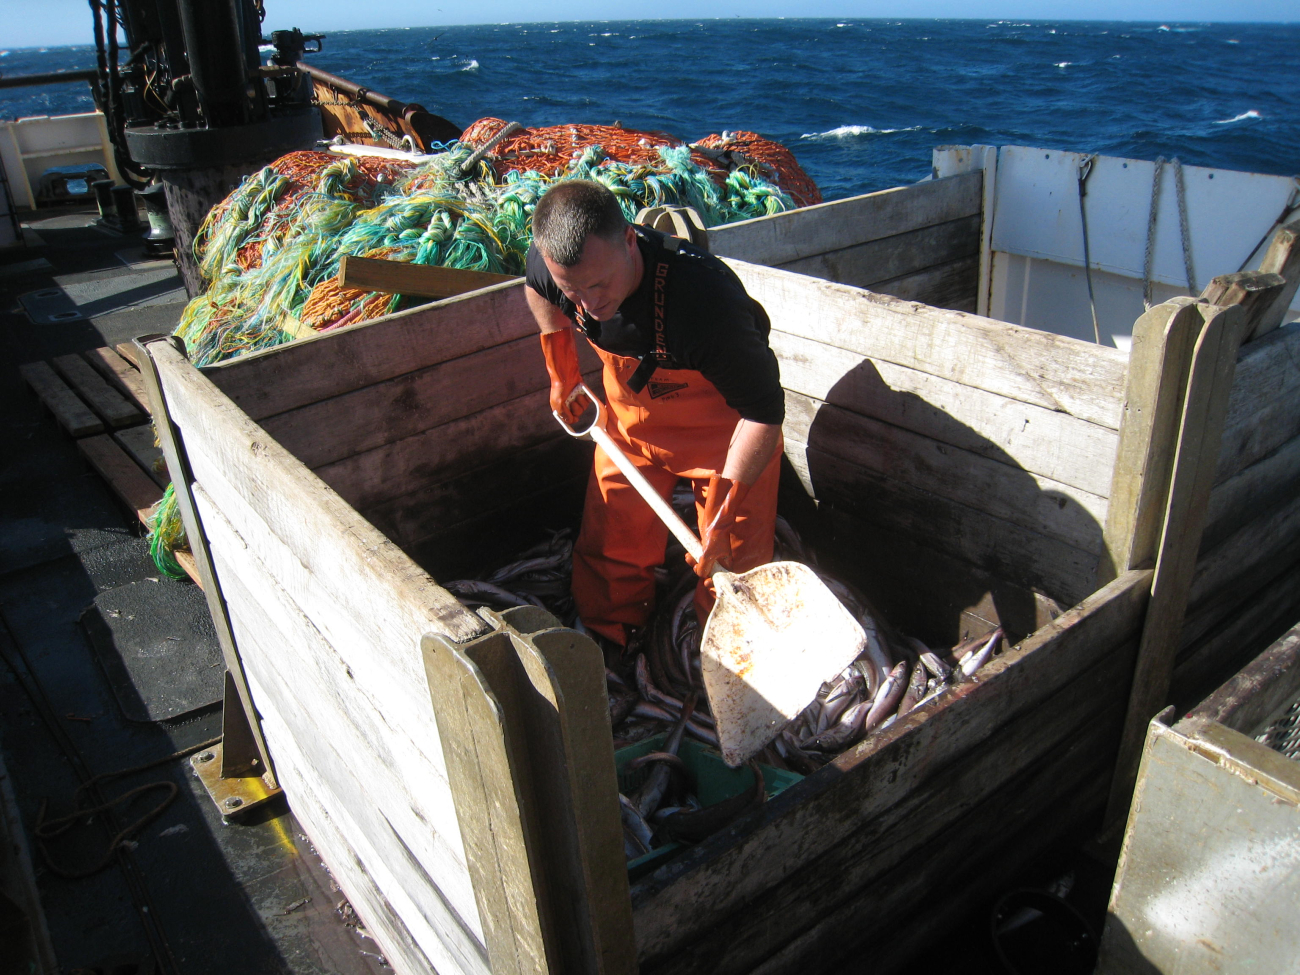 Taking sub-sample from large net catch - the wooden bins are calledcheckers